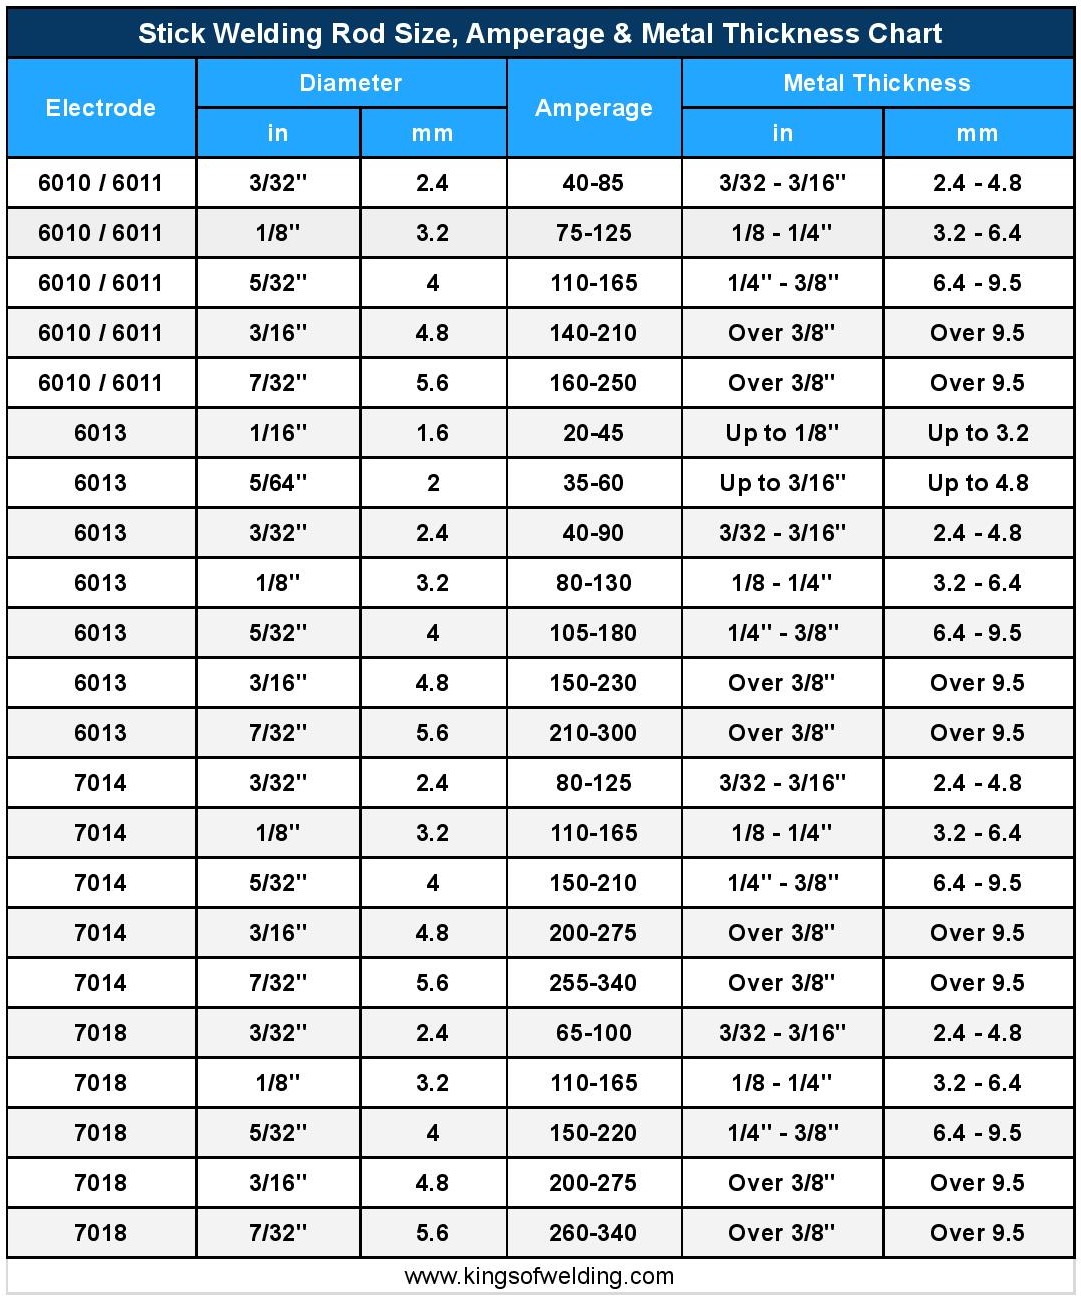 Welding Rod Sizes, Amperage & Metal Thickness Chart | Kings of Welding